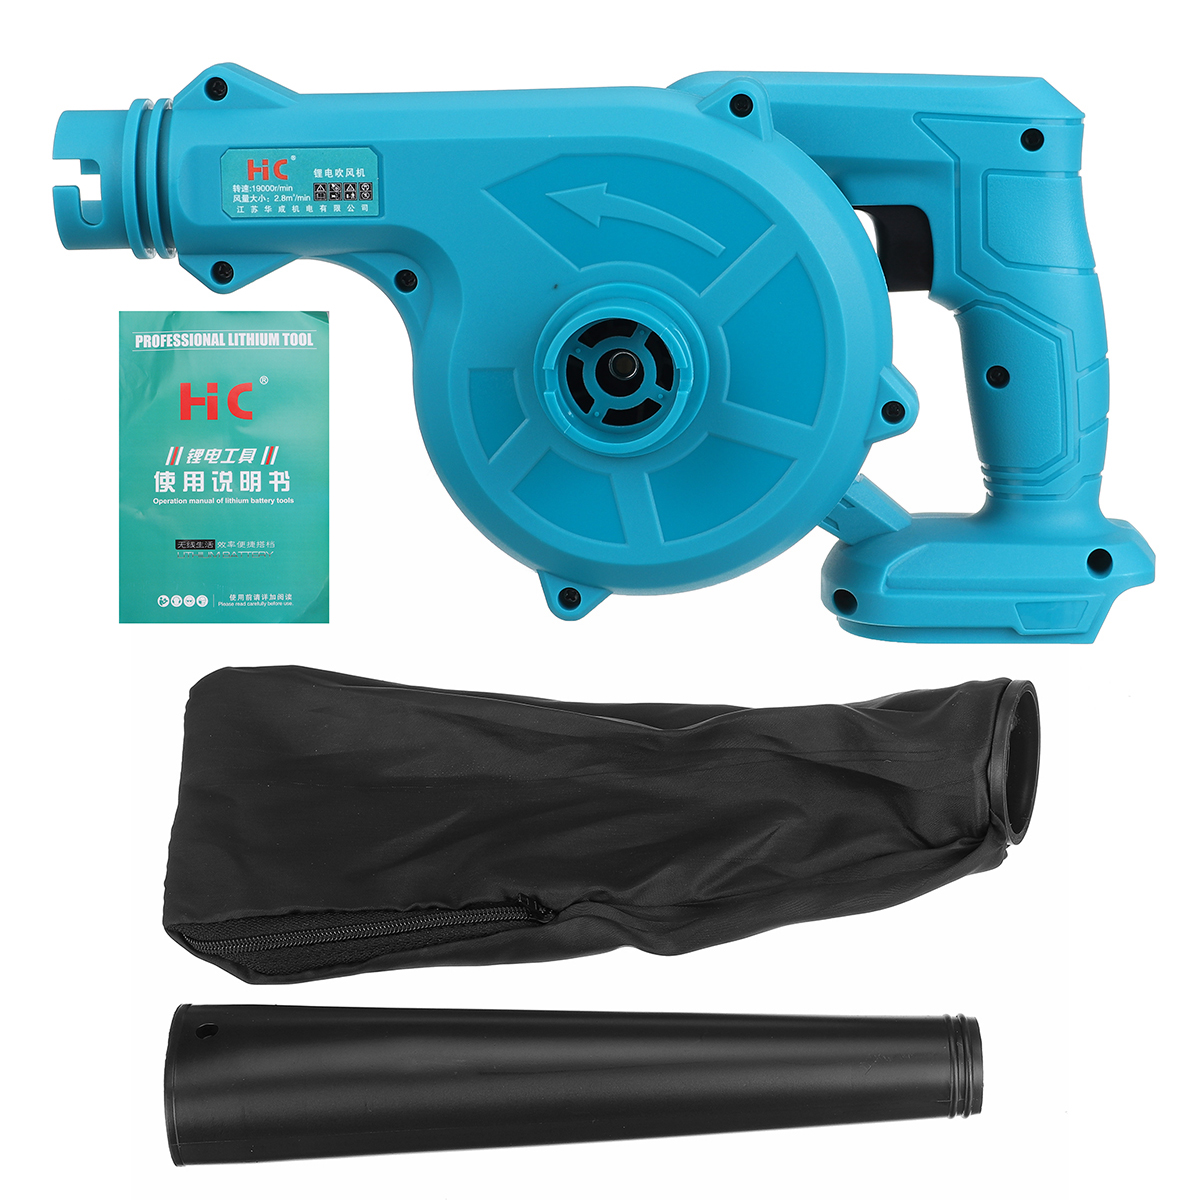 Cordless-Electric-Air-Blower-Vacuum-Cleaner-Suction-Blower-Tool-For-Makita-18V-Li-ion-Battery-1733646-10